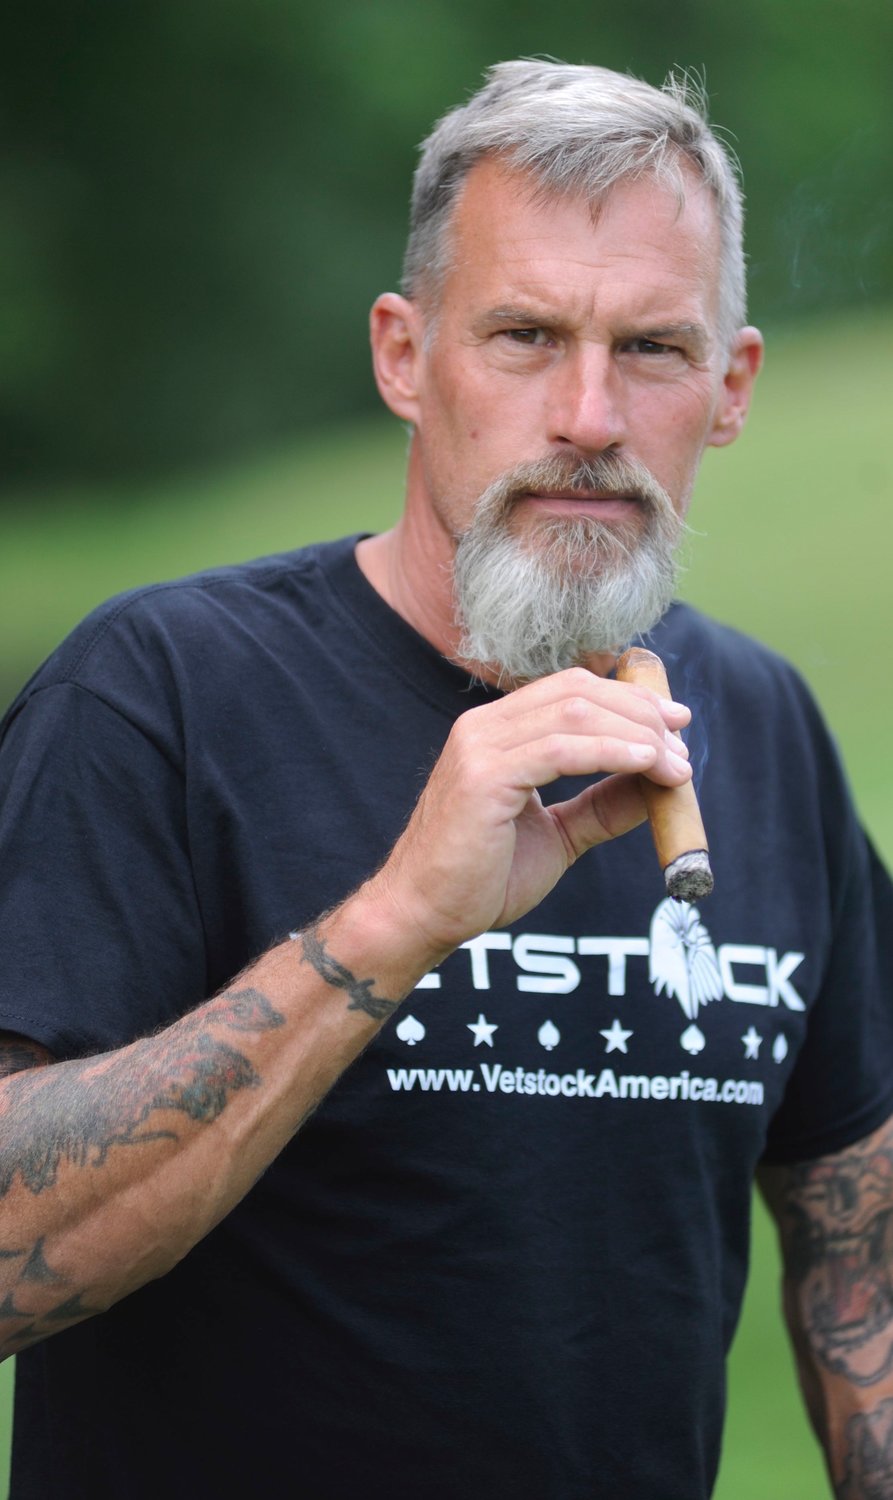 Portrait of a warrior. Jim “Strapper” Strasser served his country for 29 years and saw combat during four tours in Iraq, Bosnia and Kuwait. He led the crowd in reciting the Spartan Pledge to fight suicide among the nation’s military.